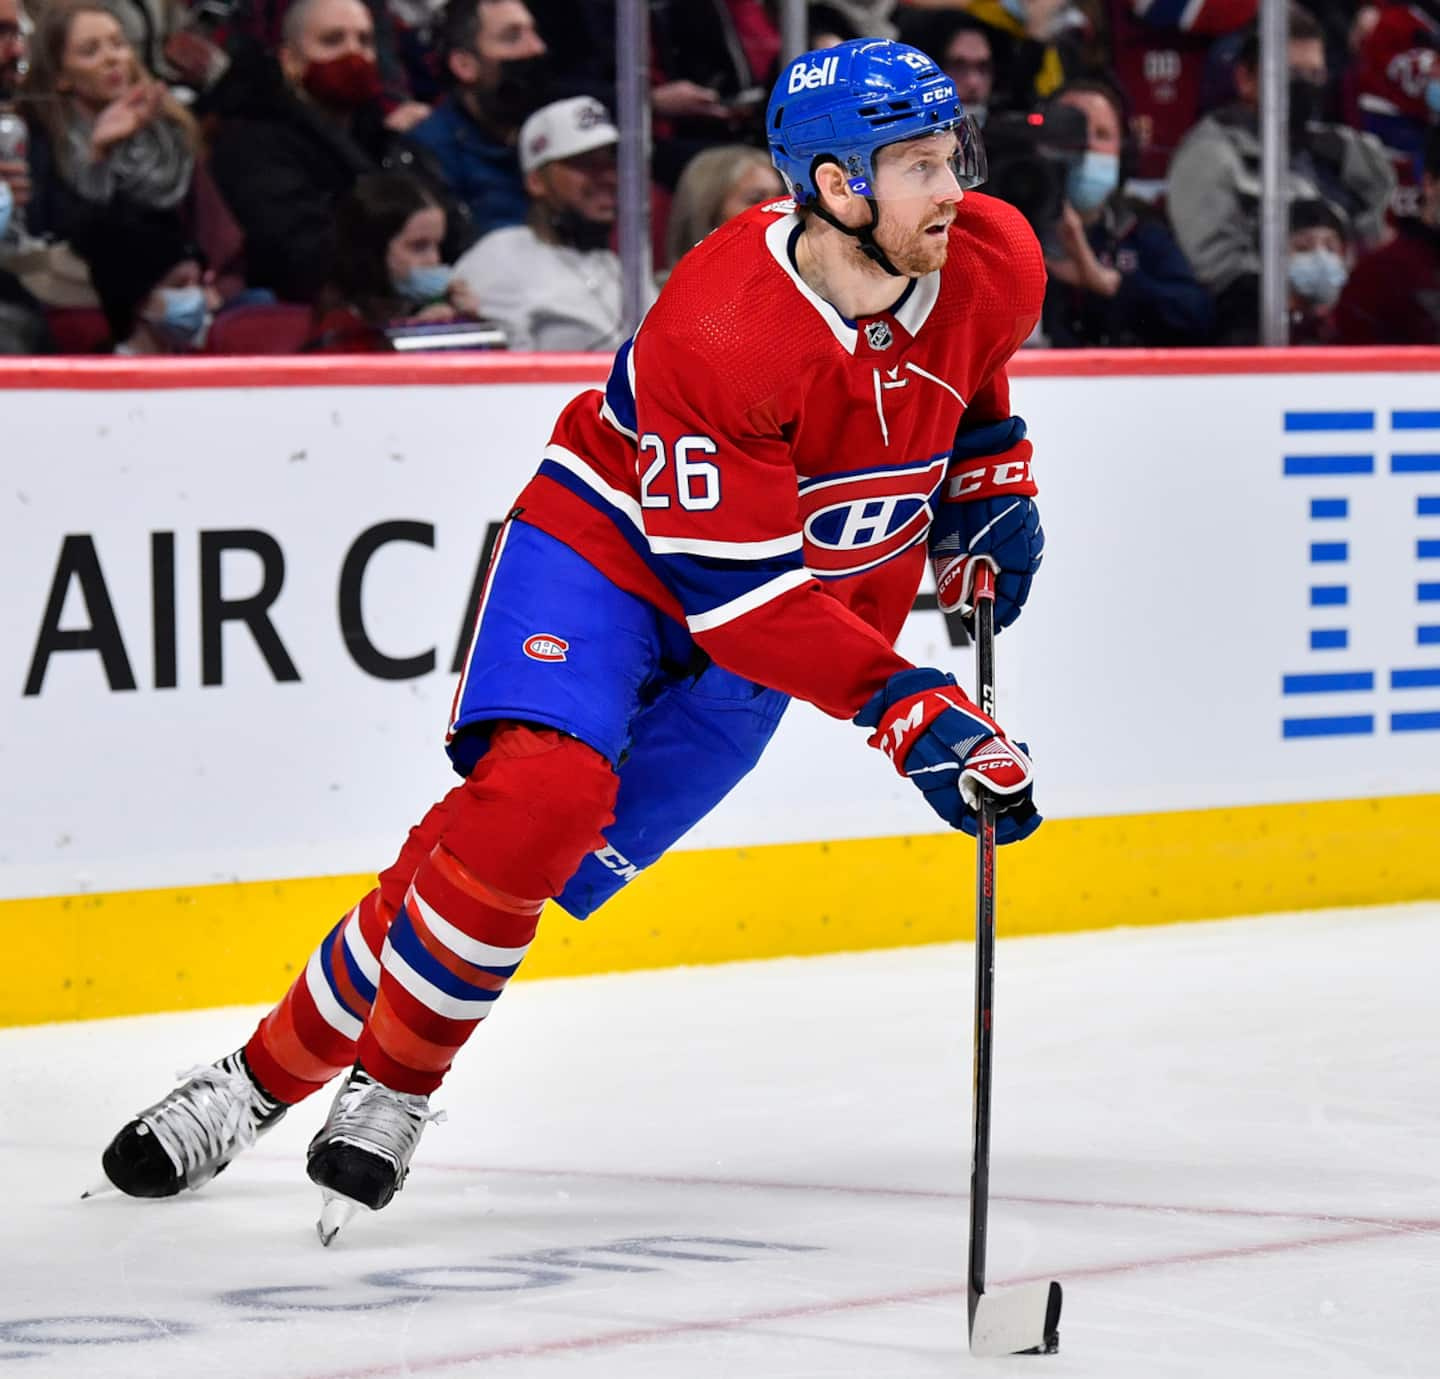 The Montreal Canadiens trade Jeff Petry in return for a Quebecer